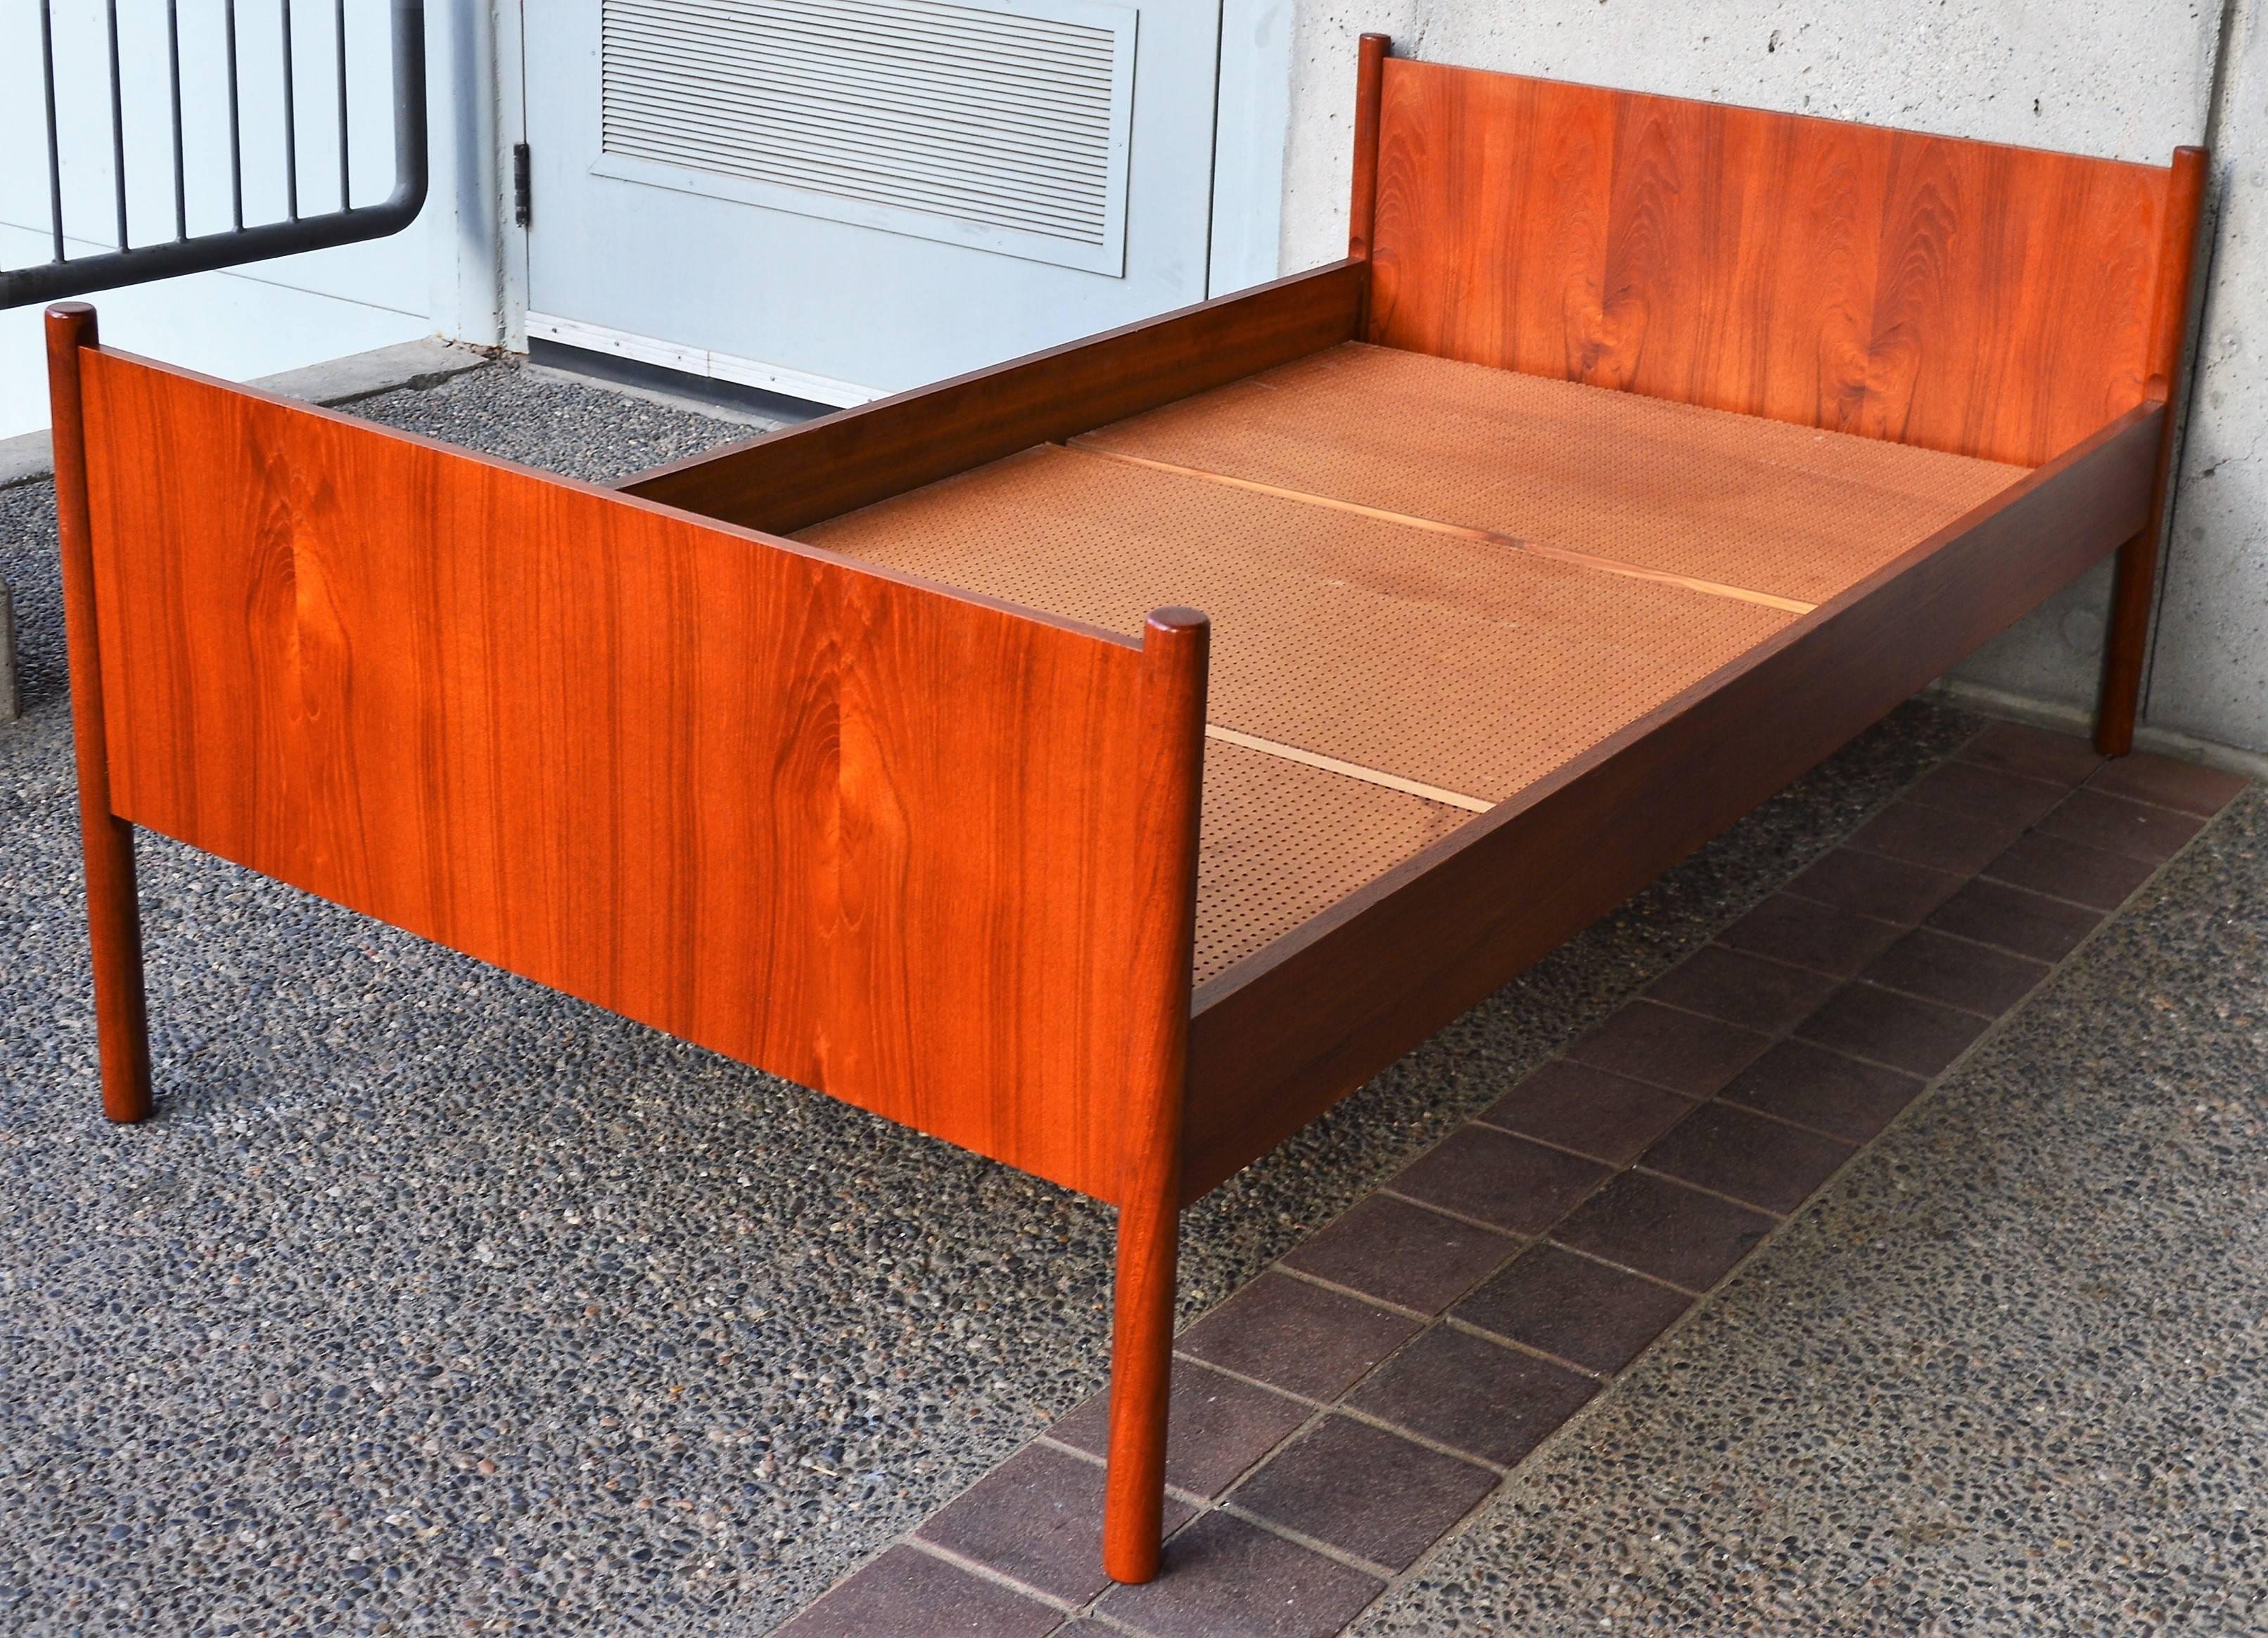 Wood Danish Modern Teak Twin Bed Frame by Westnofa with Rails and Slats